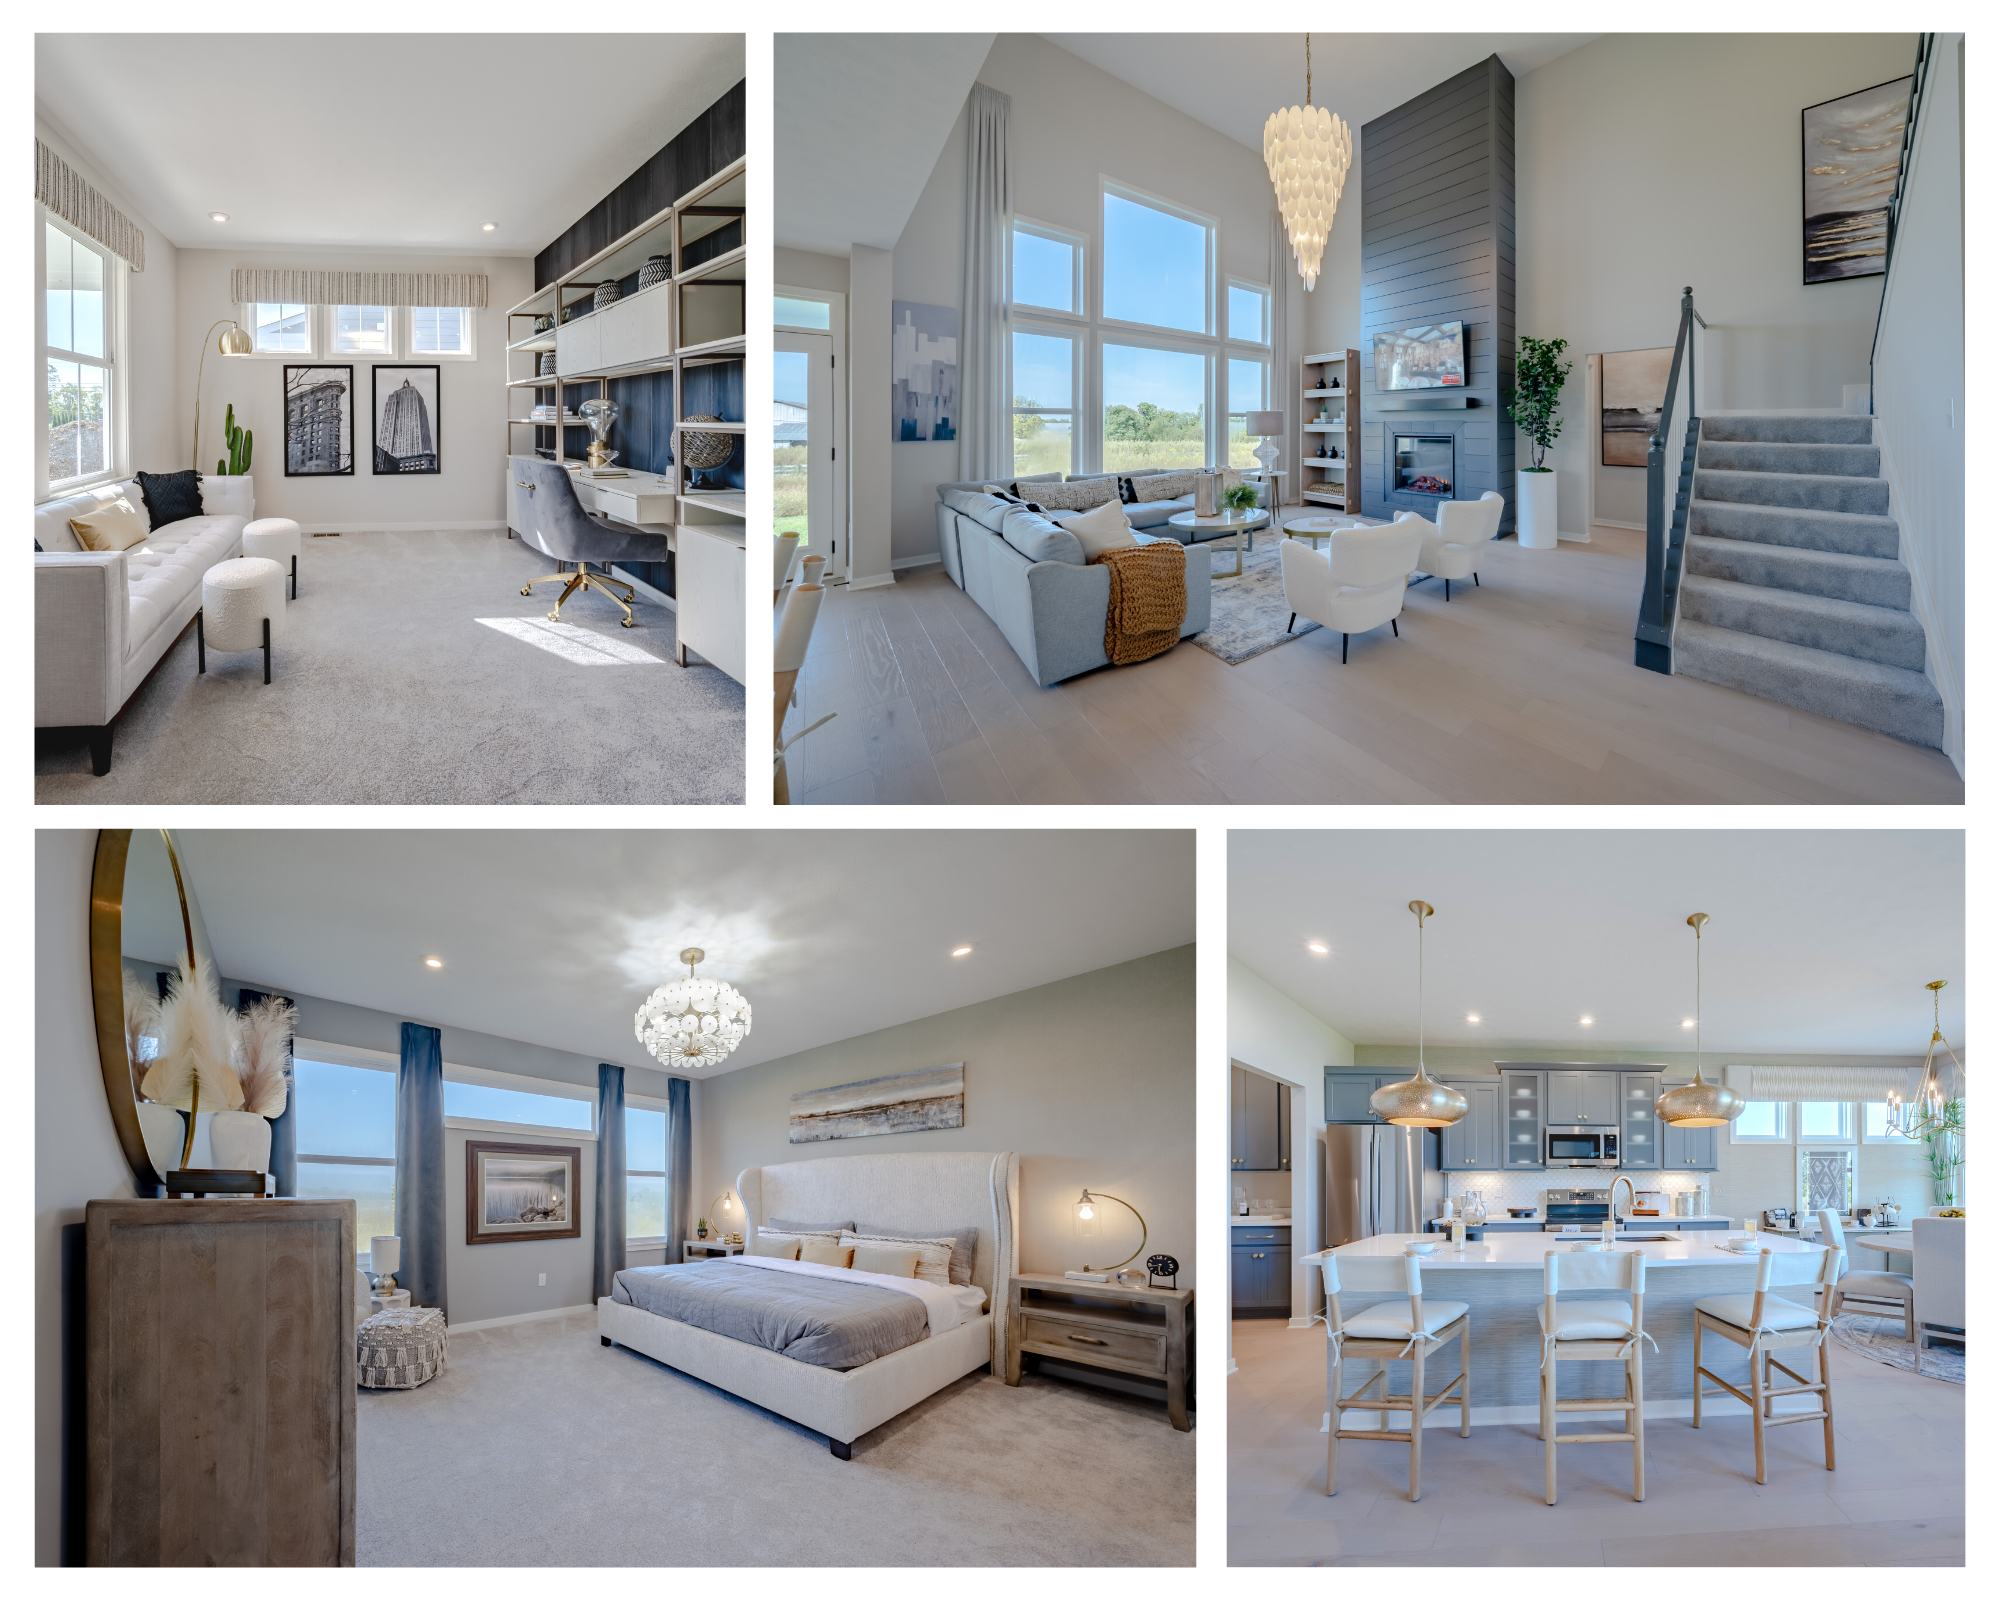 Explore the Charles, both functional and stylish floorplan featured from our Designer Collection of Homes. This open-concept design showcases a large kitchen island, a bright morning room, and a soaring two-story family room.